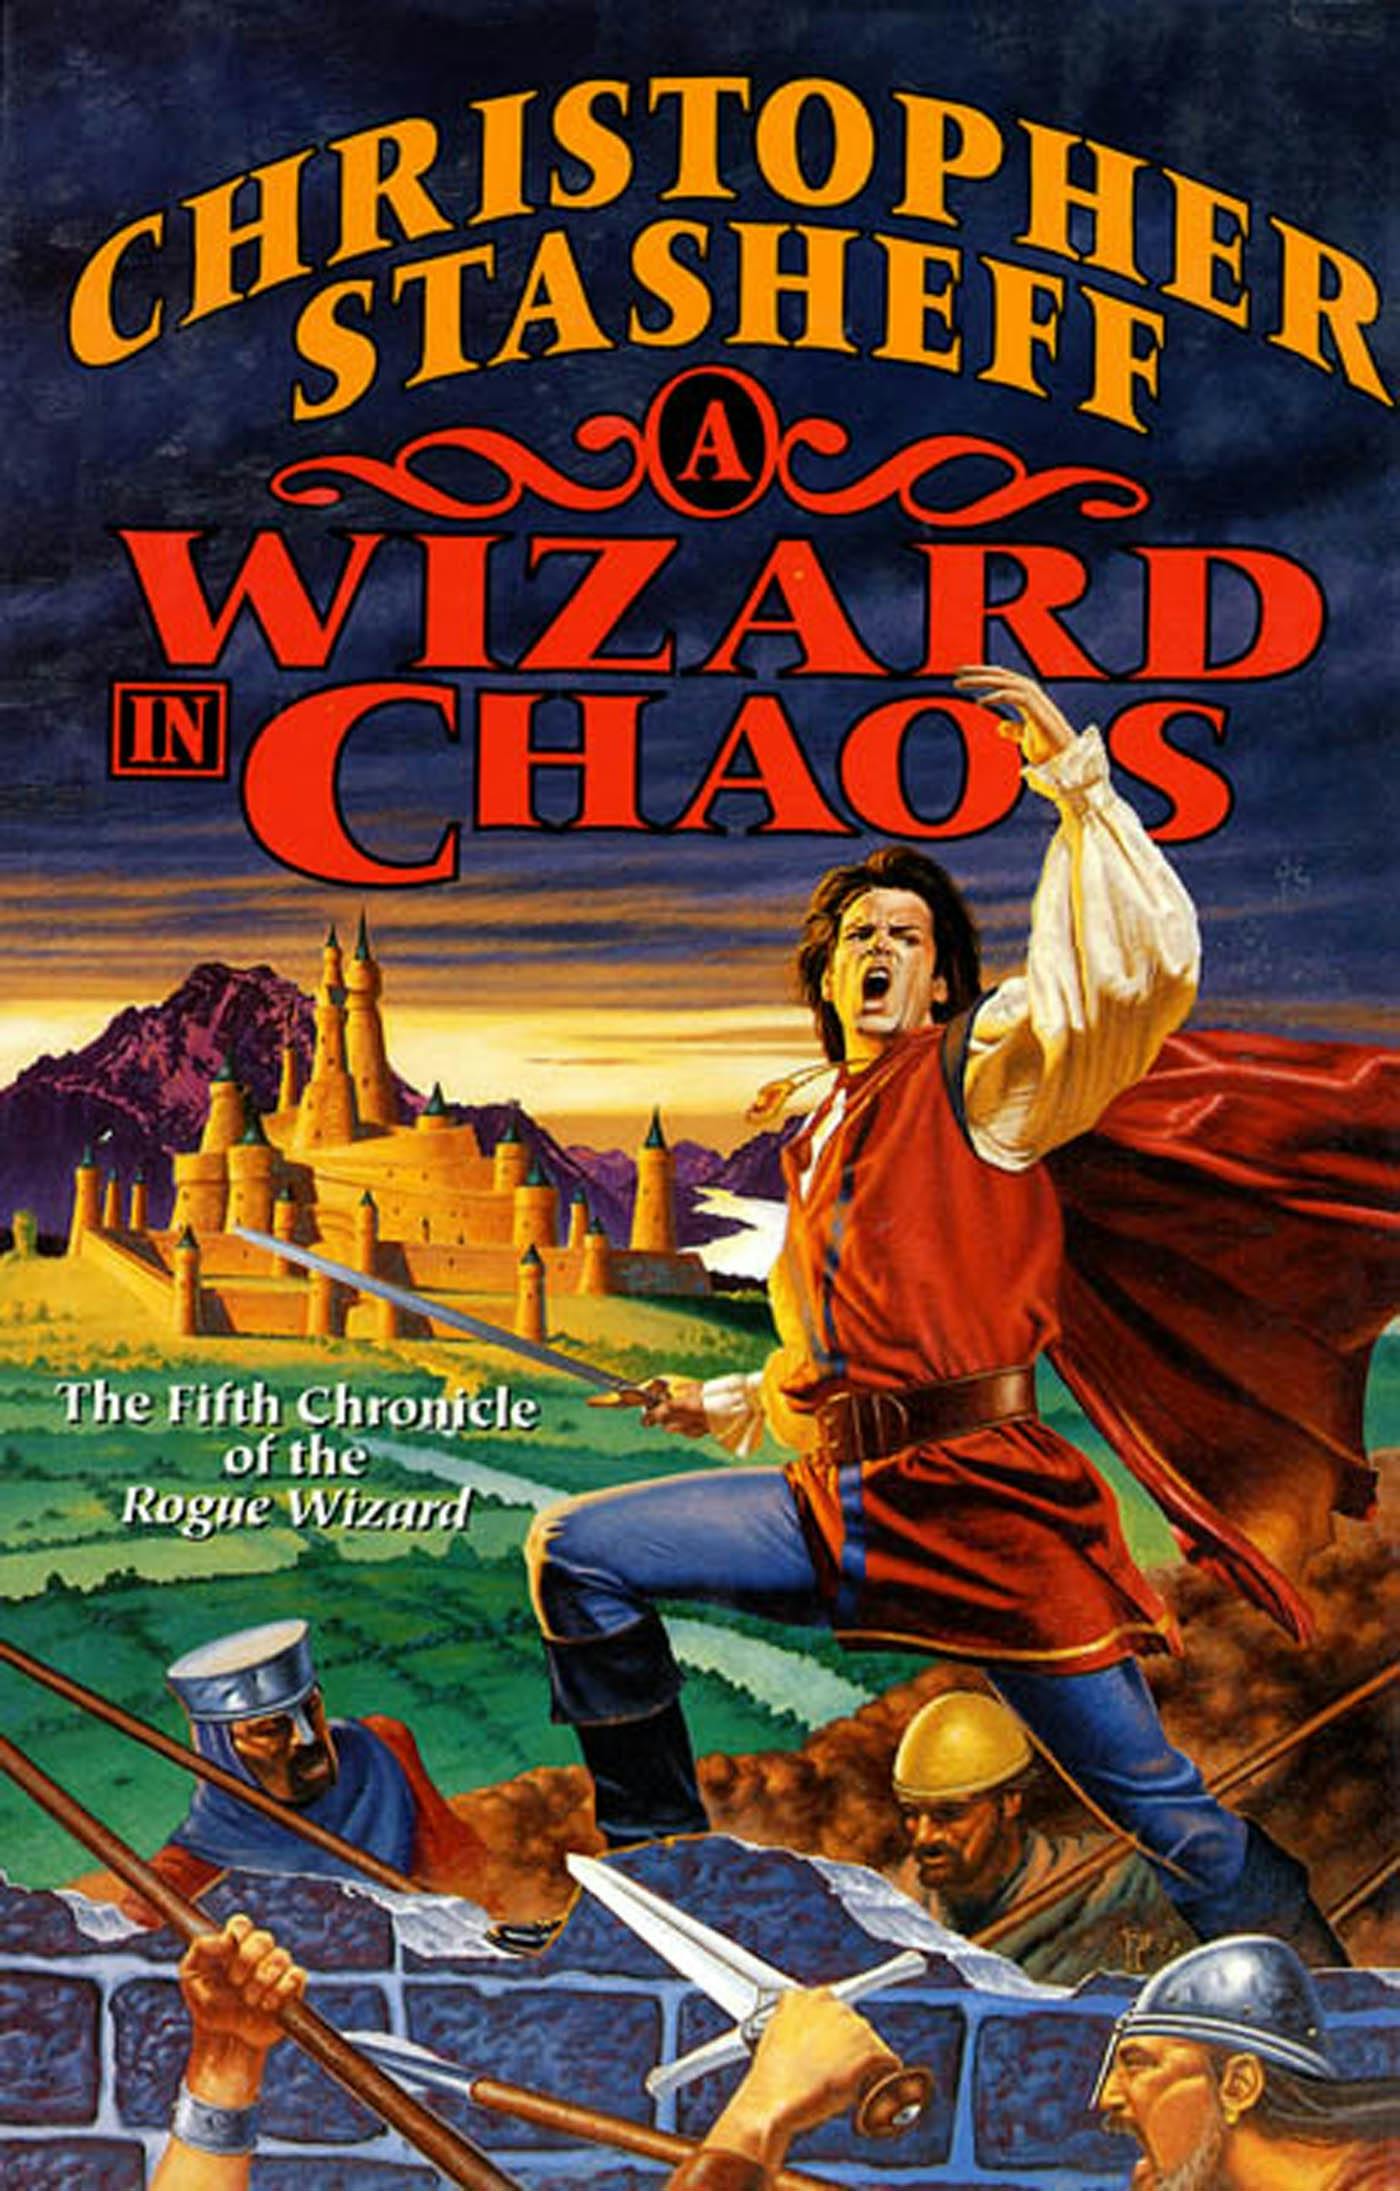 Cover for the book titled as: A Wizard In Chaos